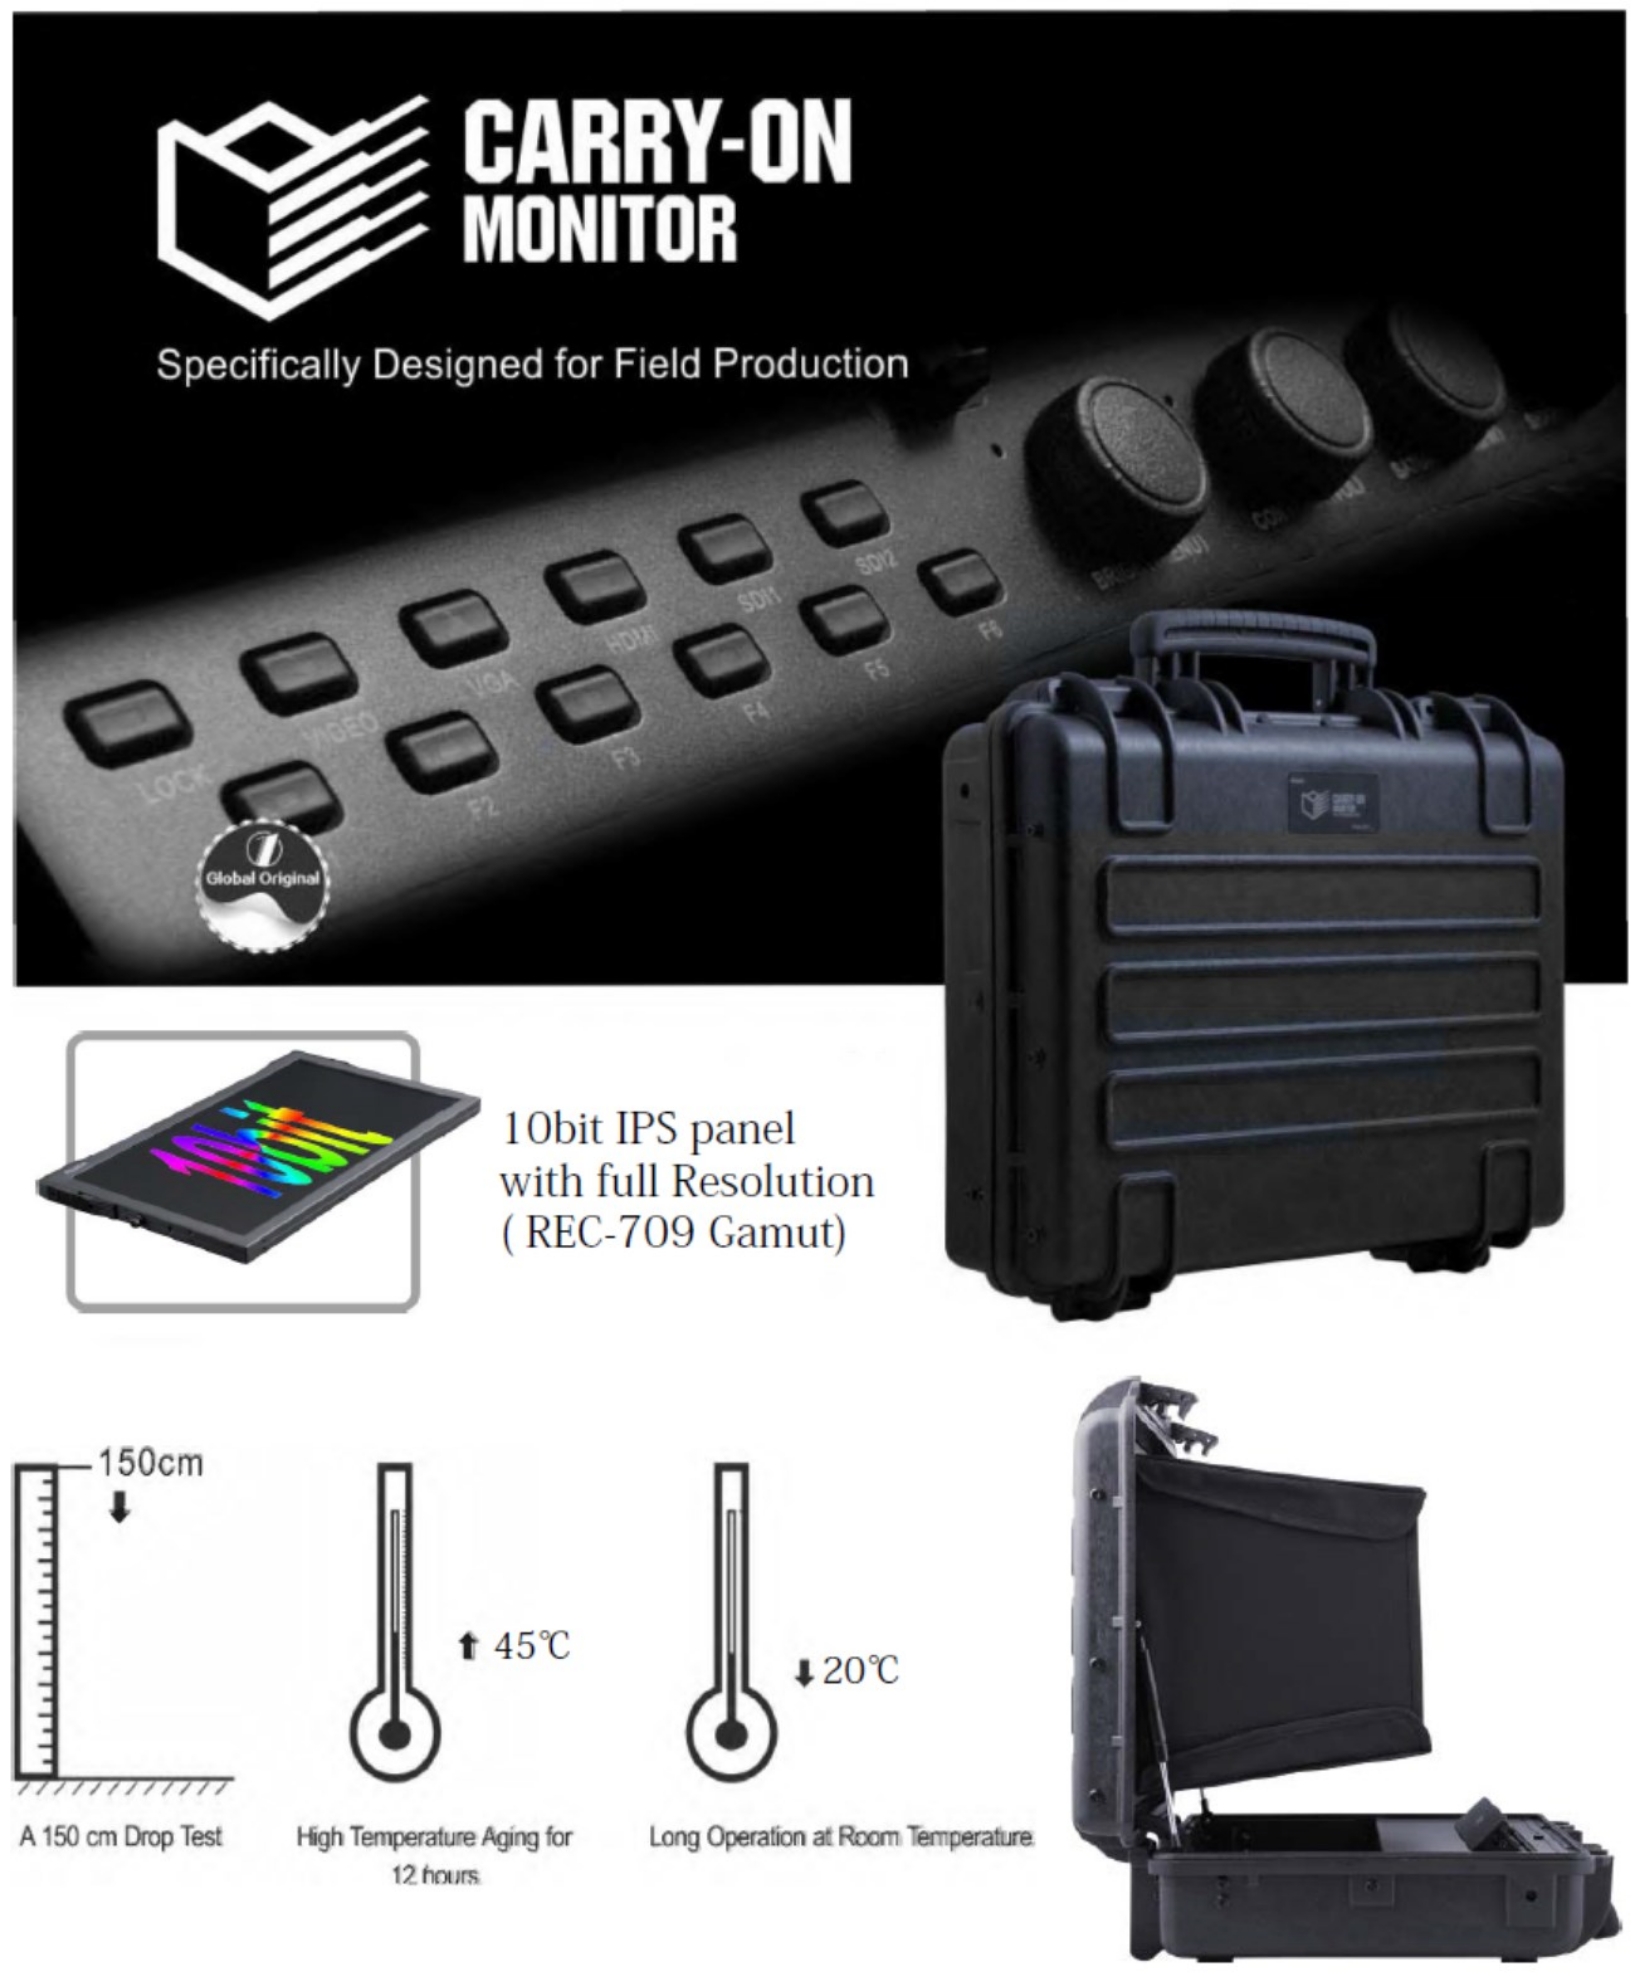 CARRY-ON MONITOR